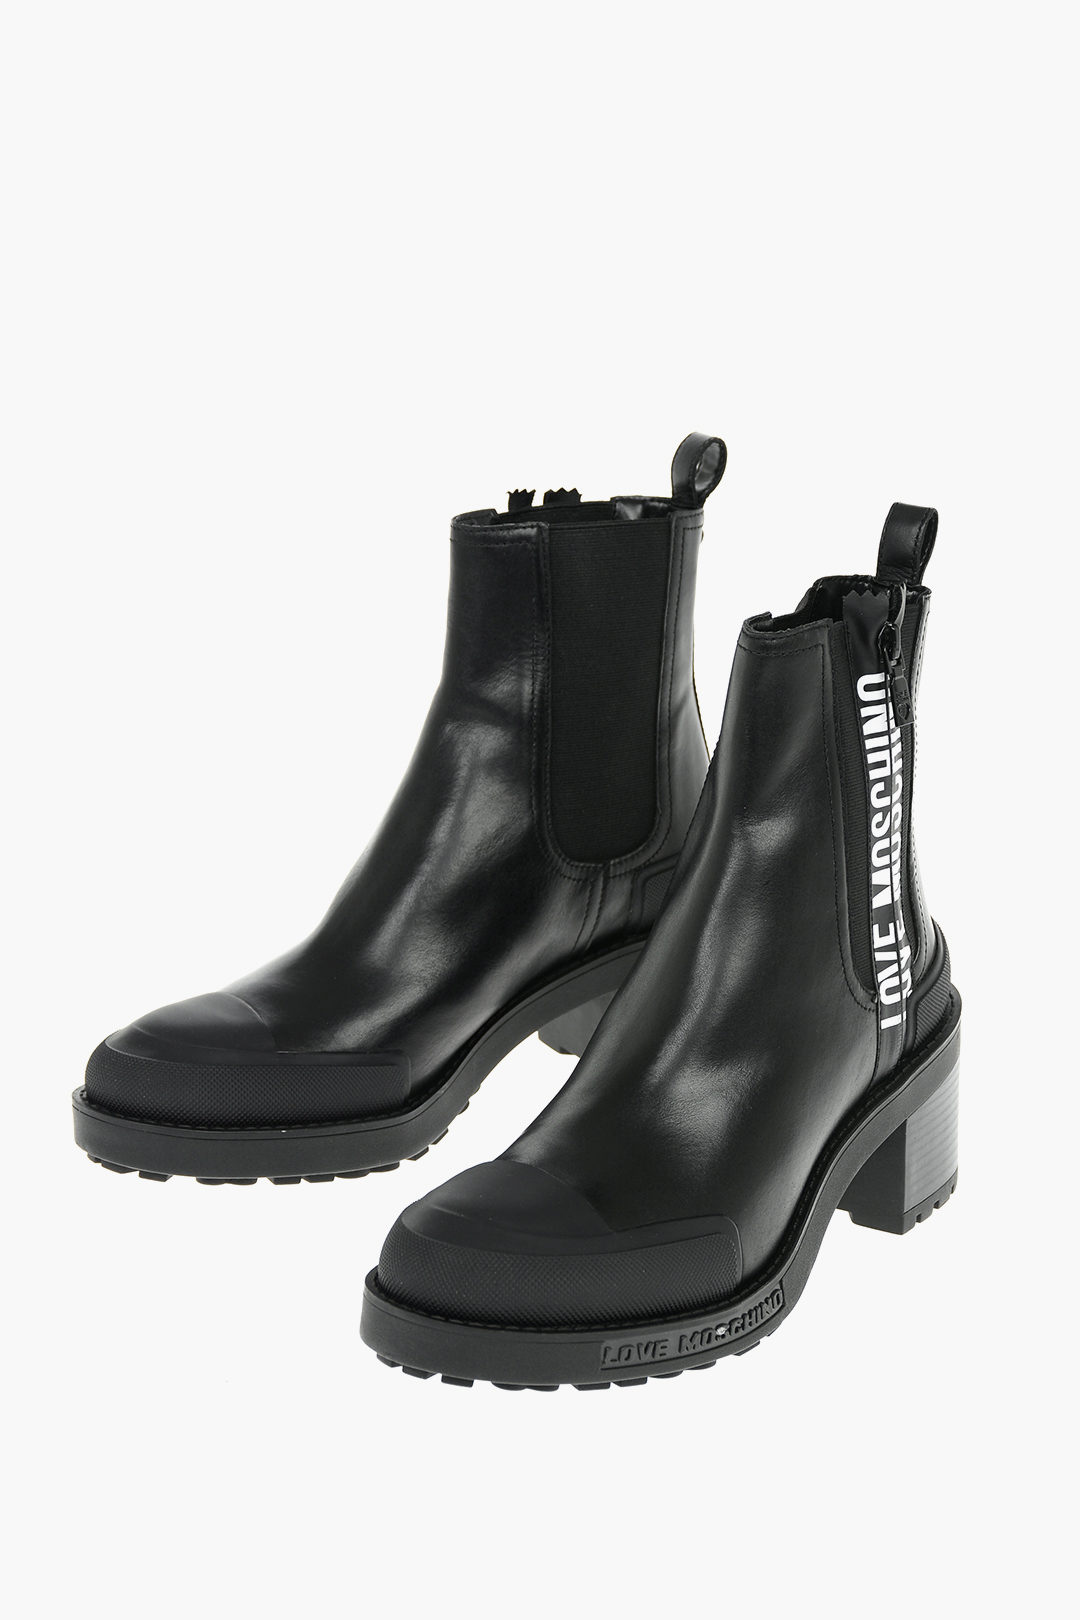 strategi Landskab Person med ansvar for sportsspil Moschino LOVE Leather Chelsea Boots with Size Zip Closure 7cm women -  Glamood Outlet